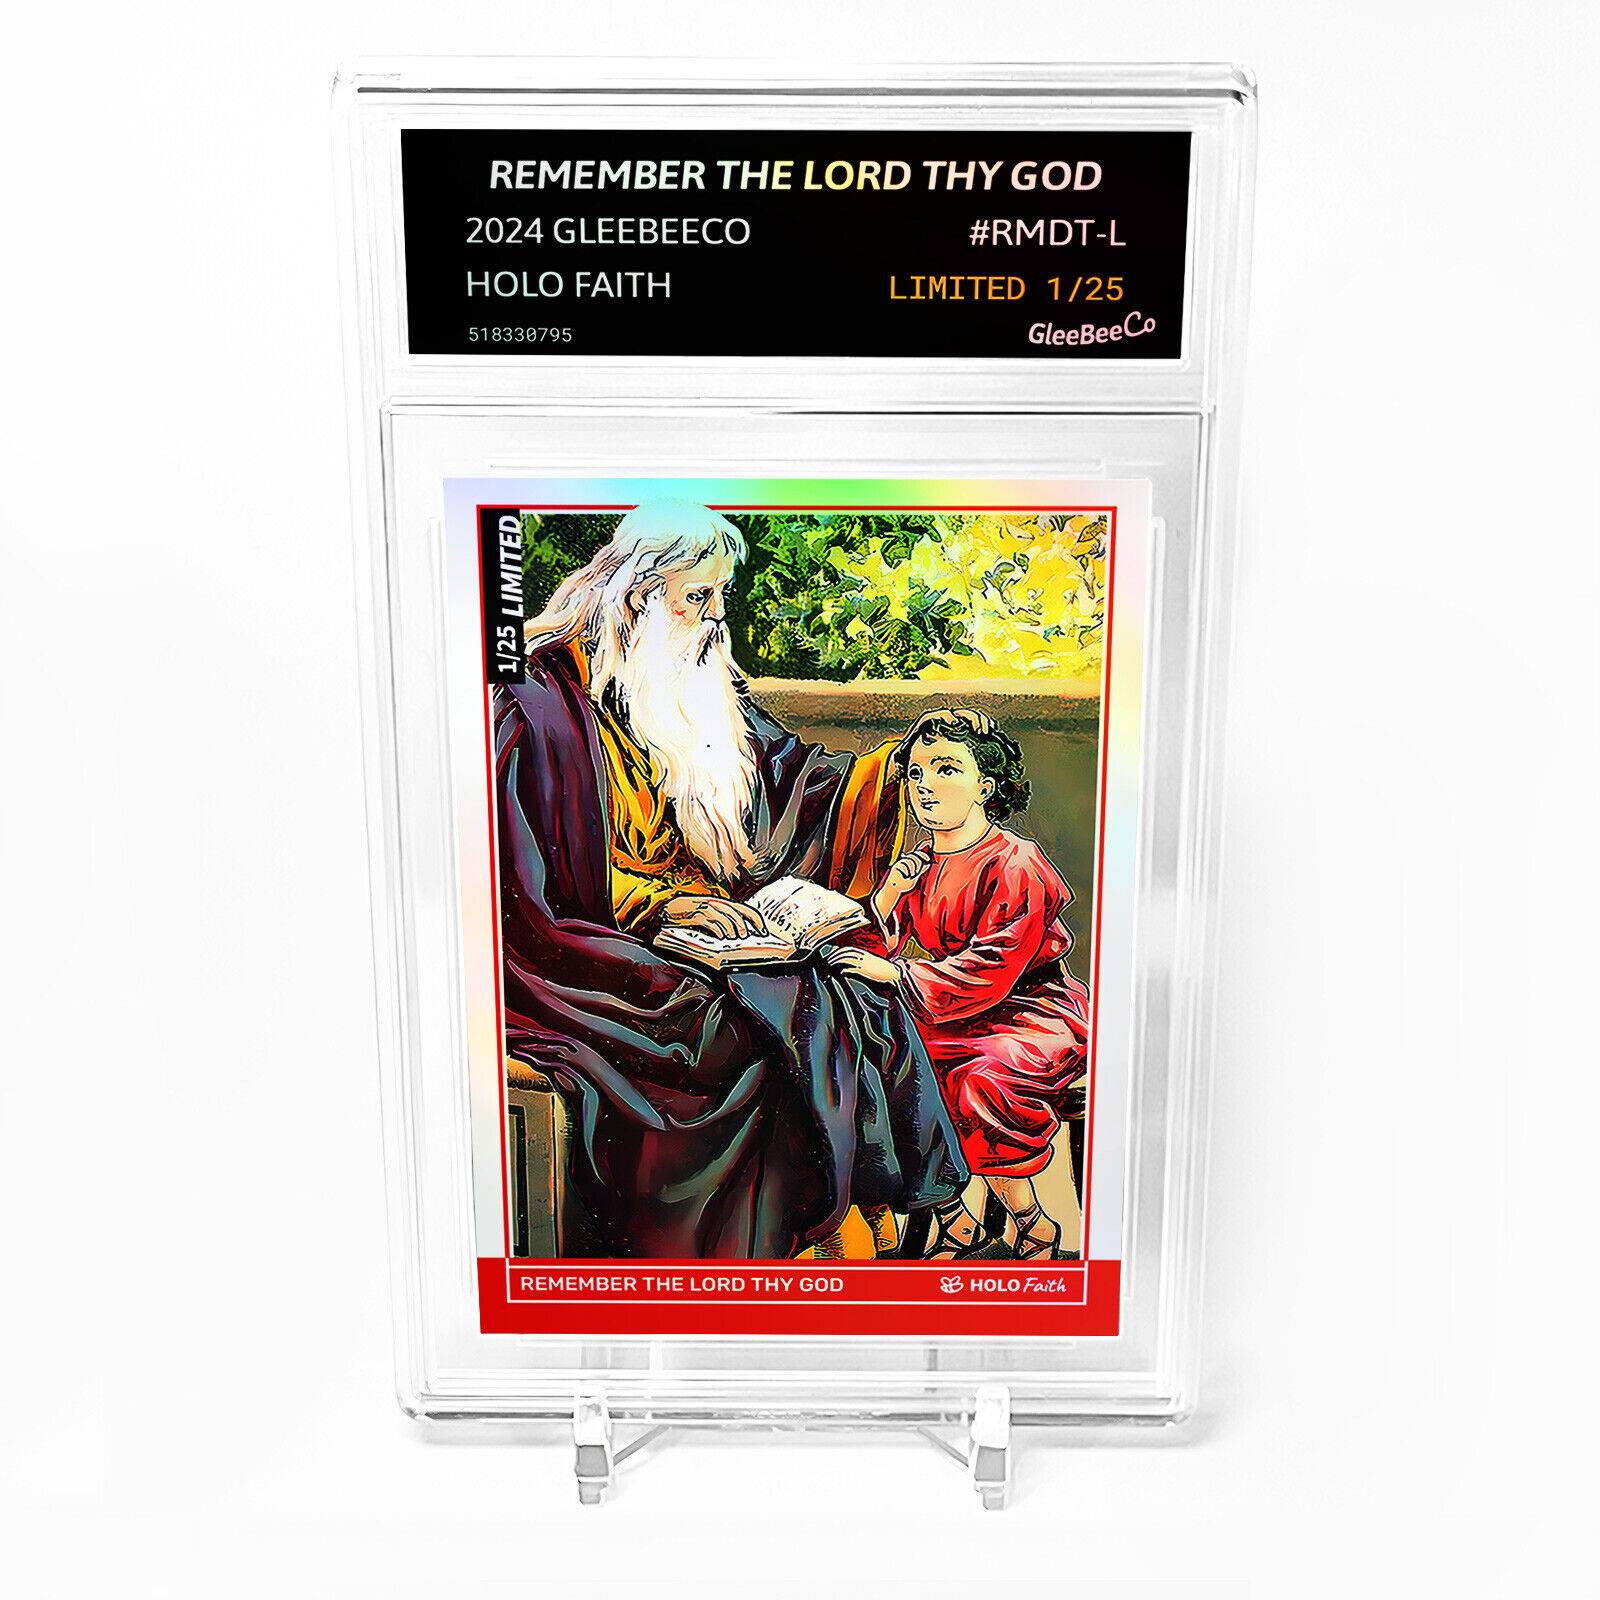 REMEMBER THE LORD THY GOD Card GleeBeeCo Holo Faith #RMDT-L Limited to Only /25